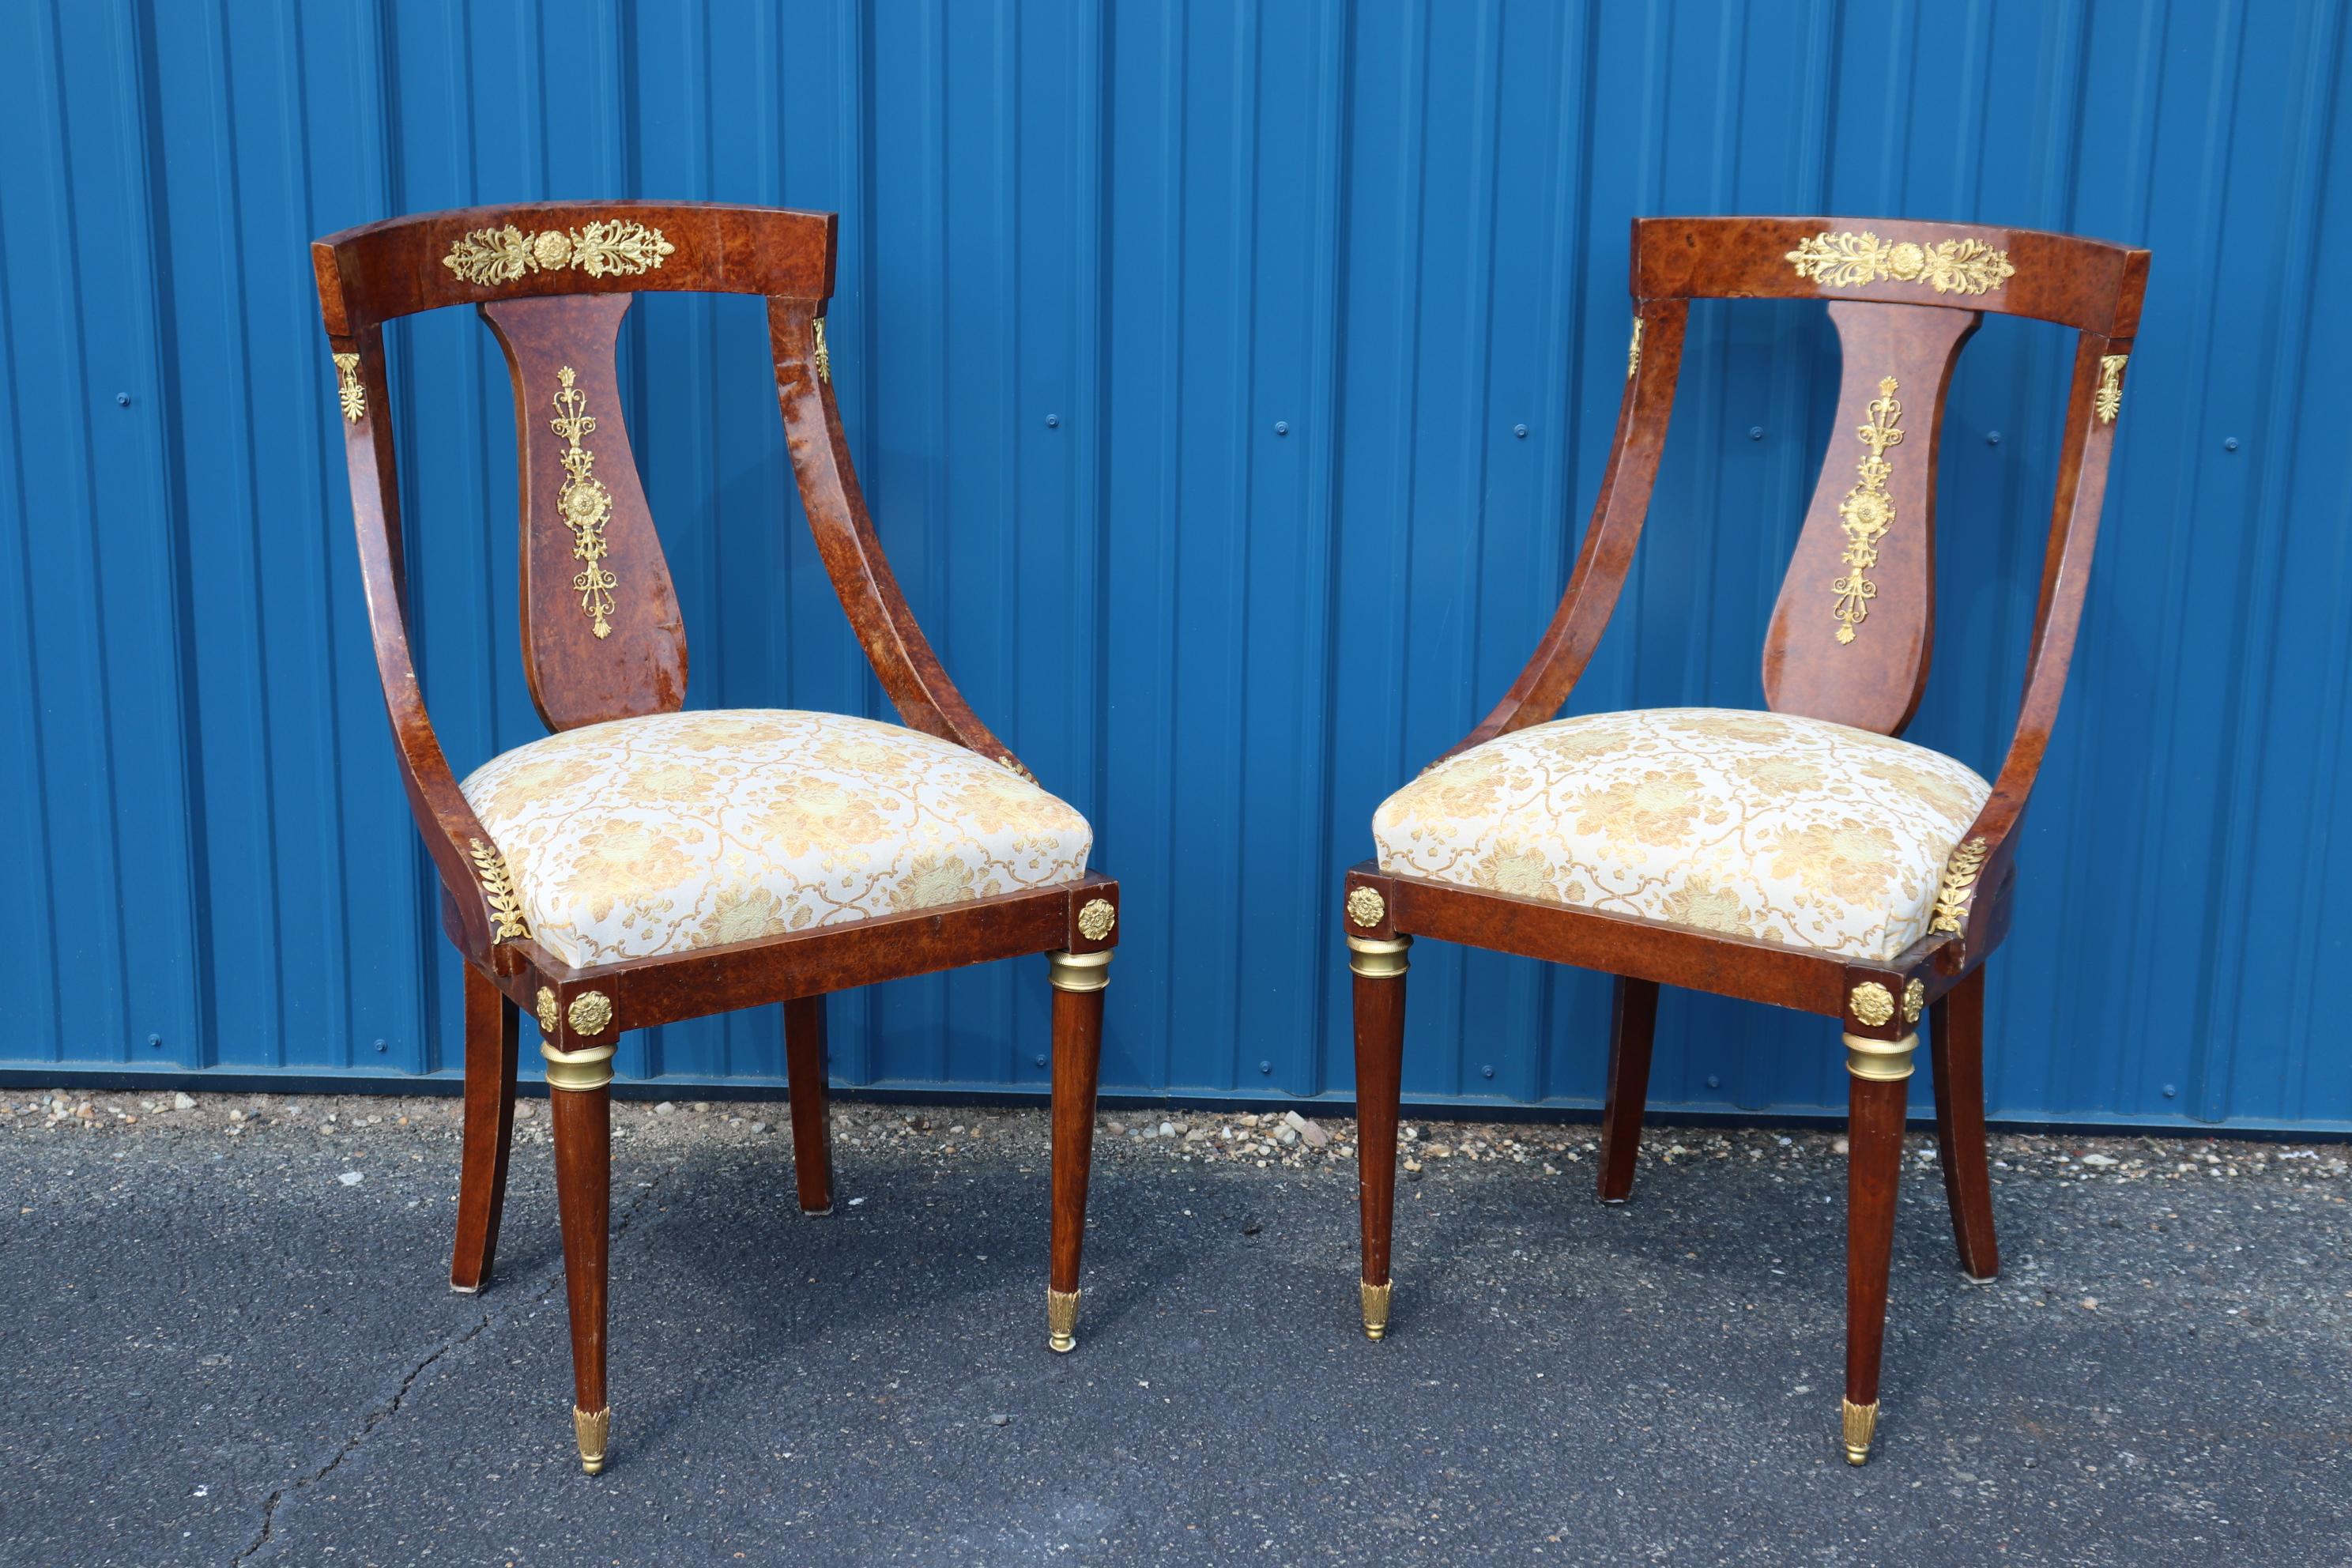 This is splendid set of 16 French Empire style gilt dor'e bronze mounted dining chairs that match a 14 foot burled walnut dining table we have listed separately. The chairs are made of some of the best amboyna burled walnut we've ever seen and the